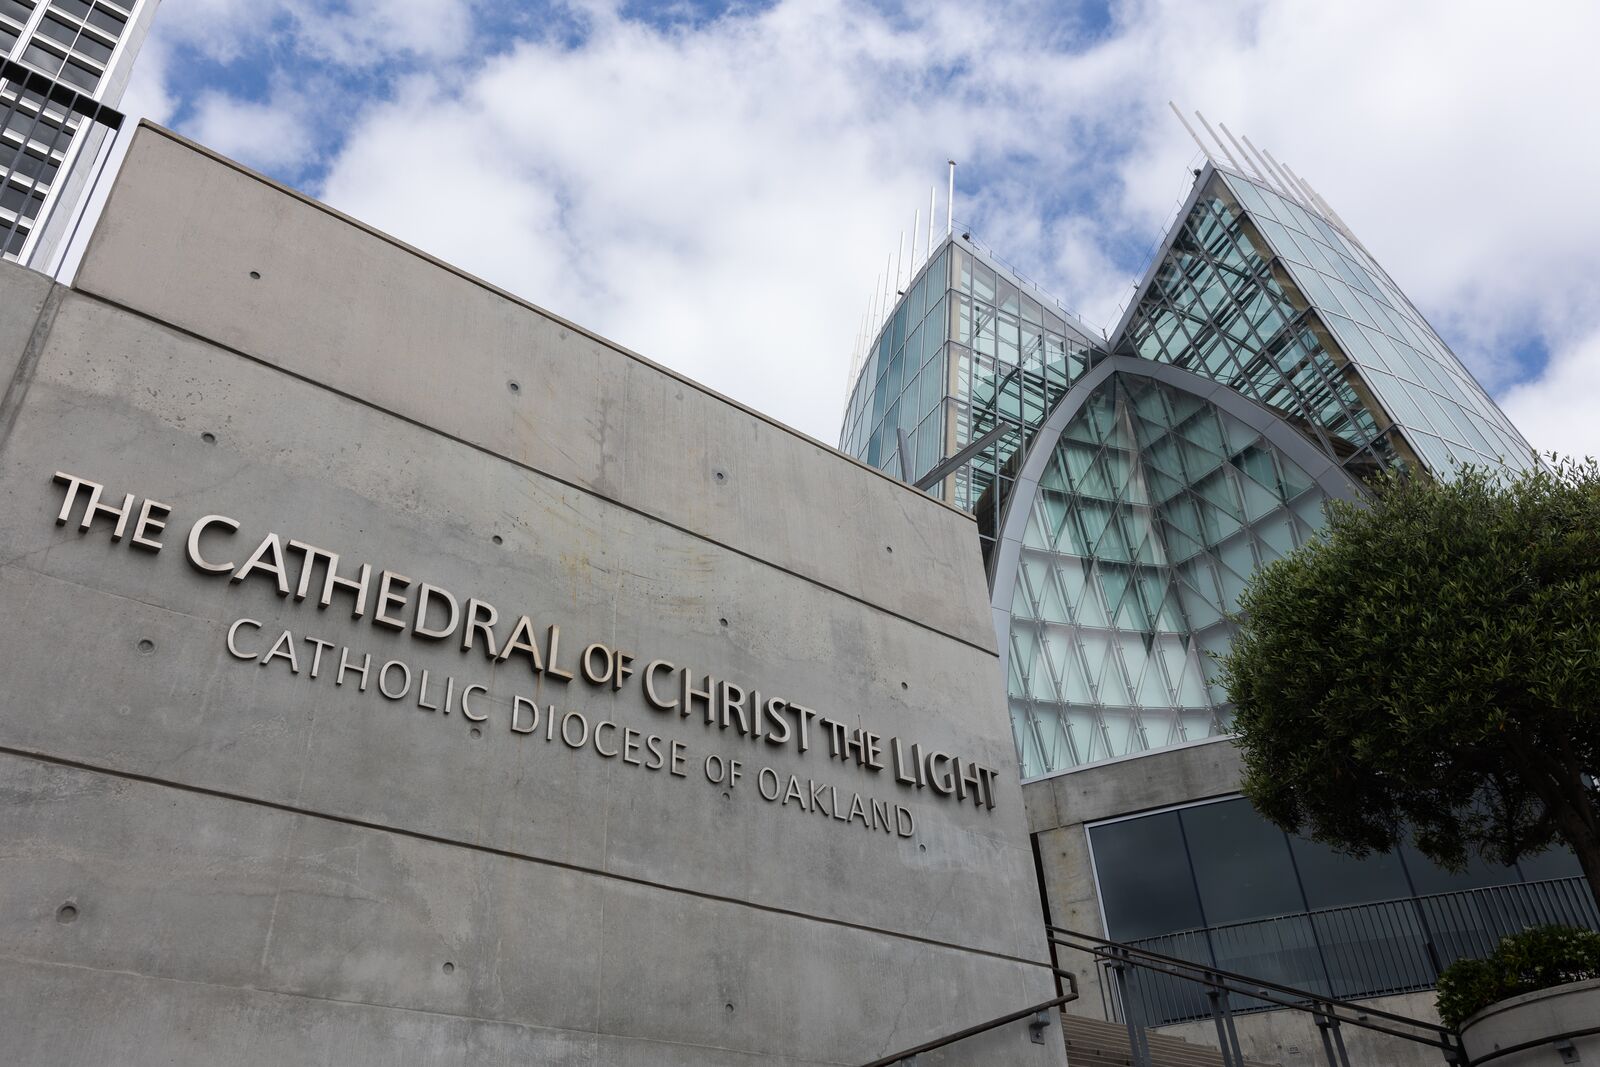 A gleaming cathedral made up entirely of steel and glass rises above a cement wall with a neat metal lettered sign that reads "The Cathedral of Christ the Light," and "Diocese of Oakland."